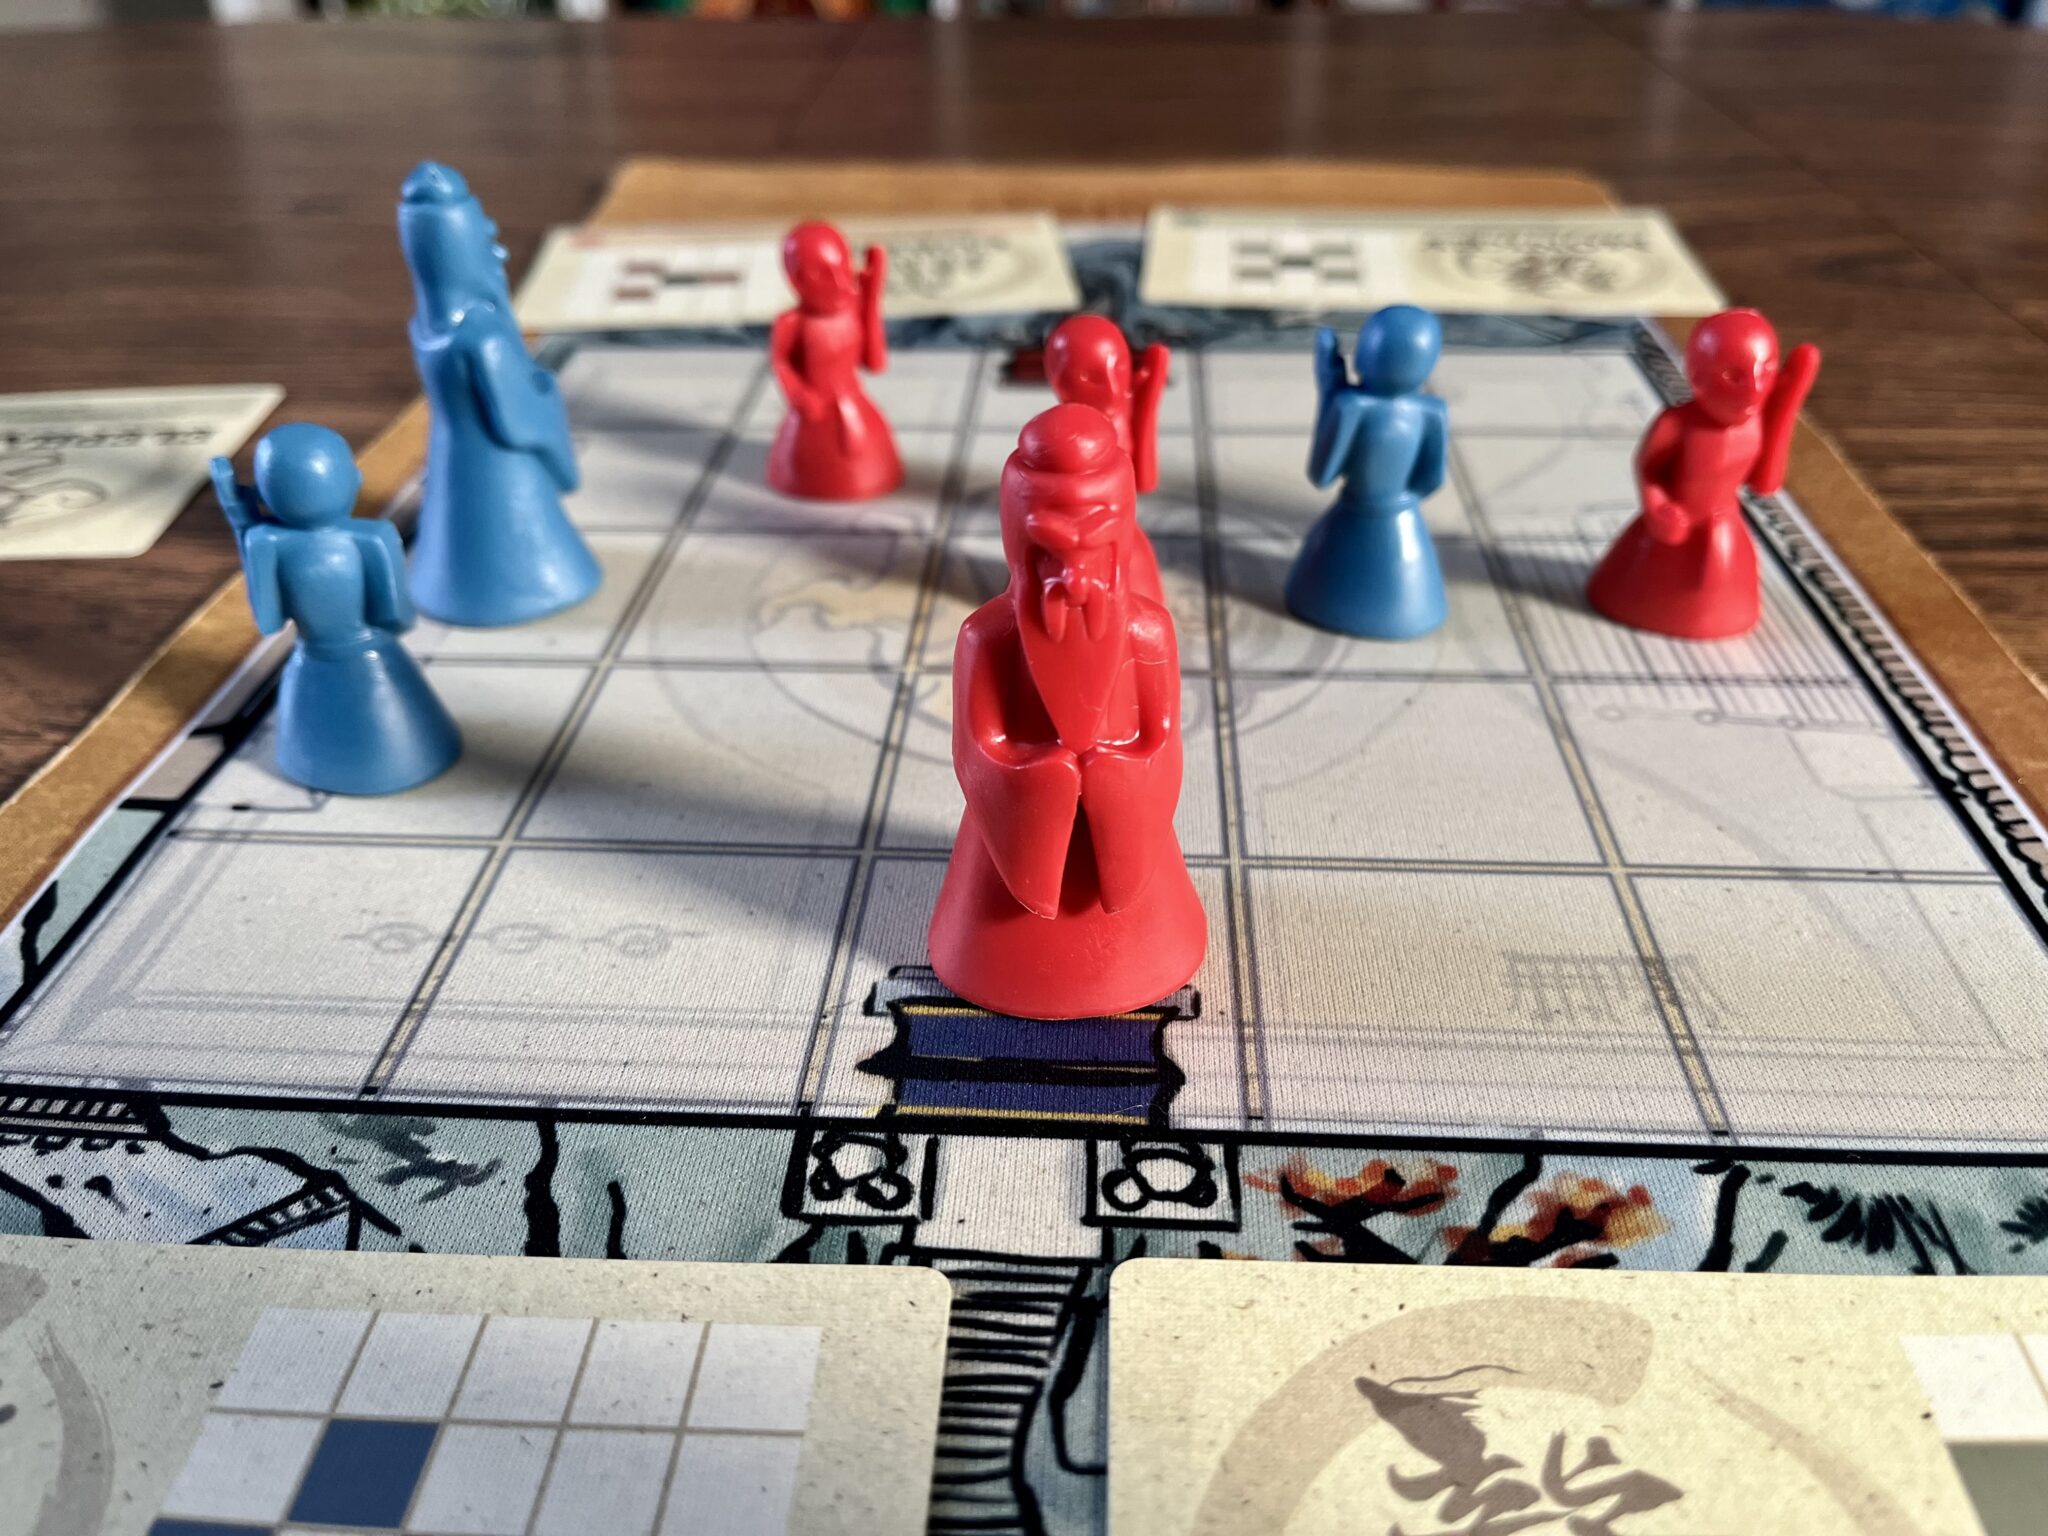 Onitama victory with the red master pawn winning the game